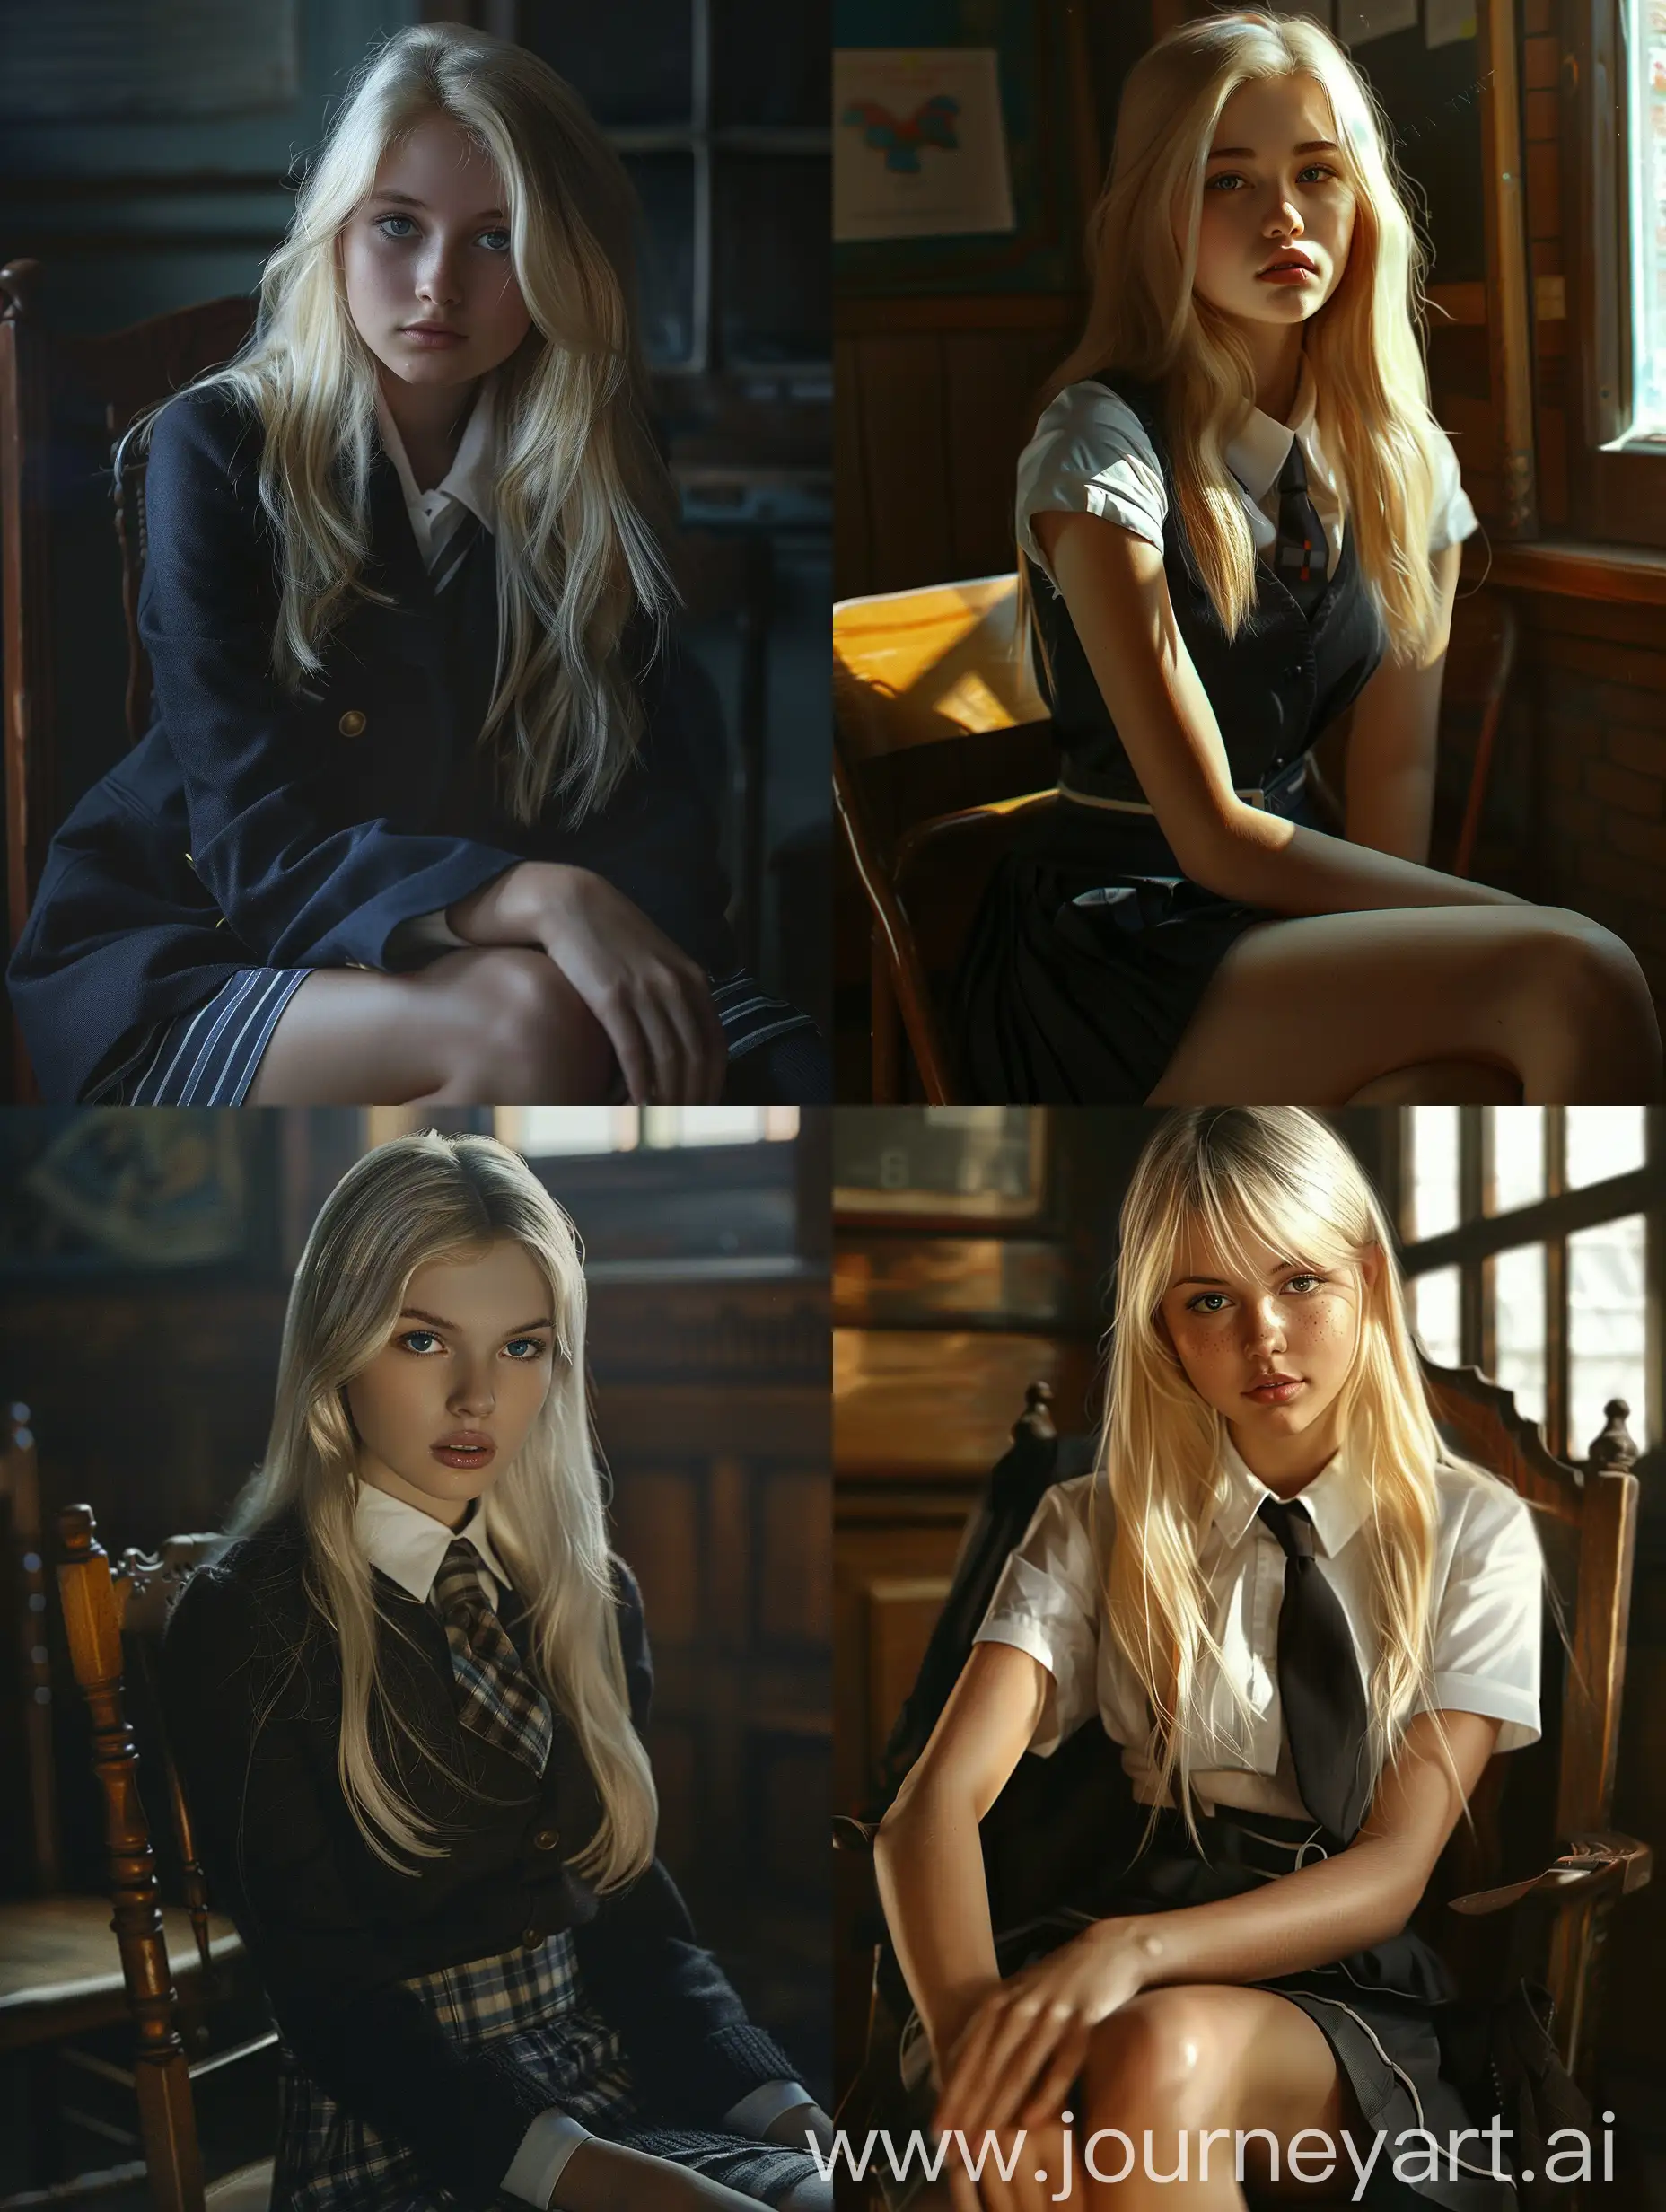 1 blonde girl , 22 years old, school uniform, sitting on chair,  ,   Volumetric lighting adds depth, with highlights and reflections emphasizing her expressive eyes and glossy hair. 